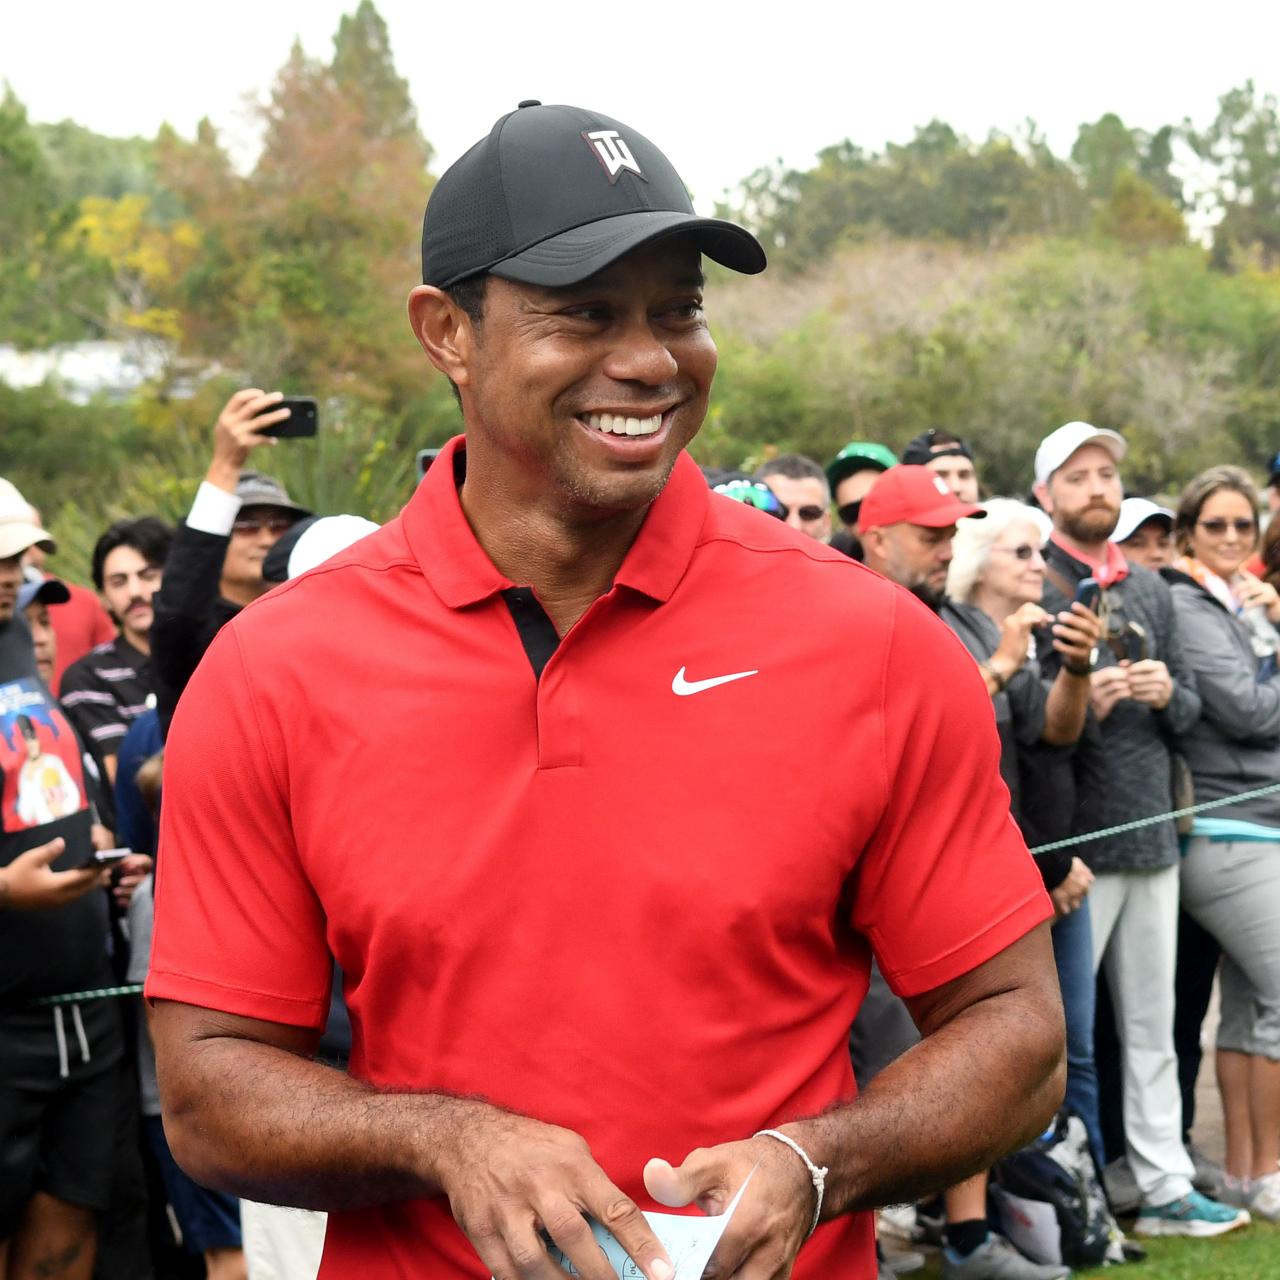 Unstoppable in Red: Tiger Woods and Nike at the Masters - The New